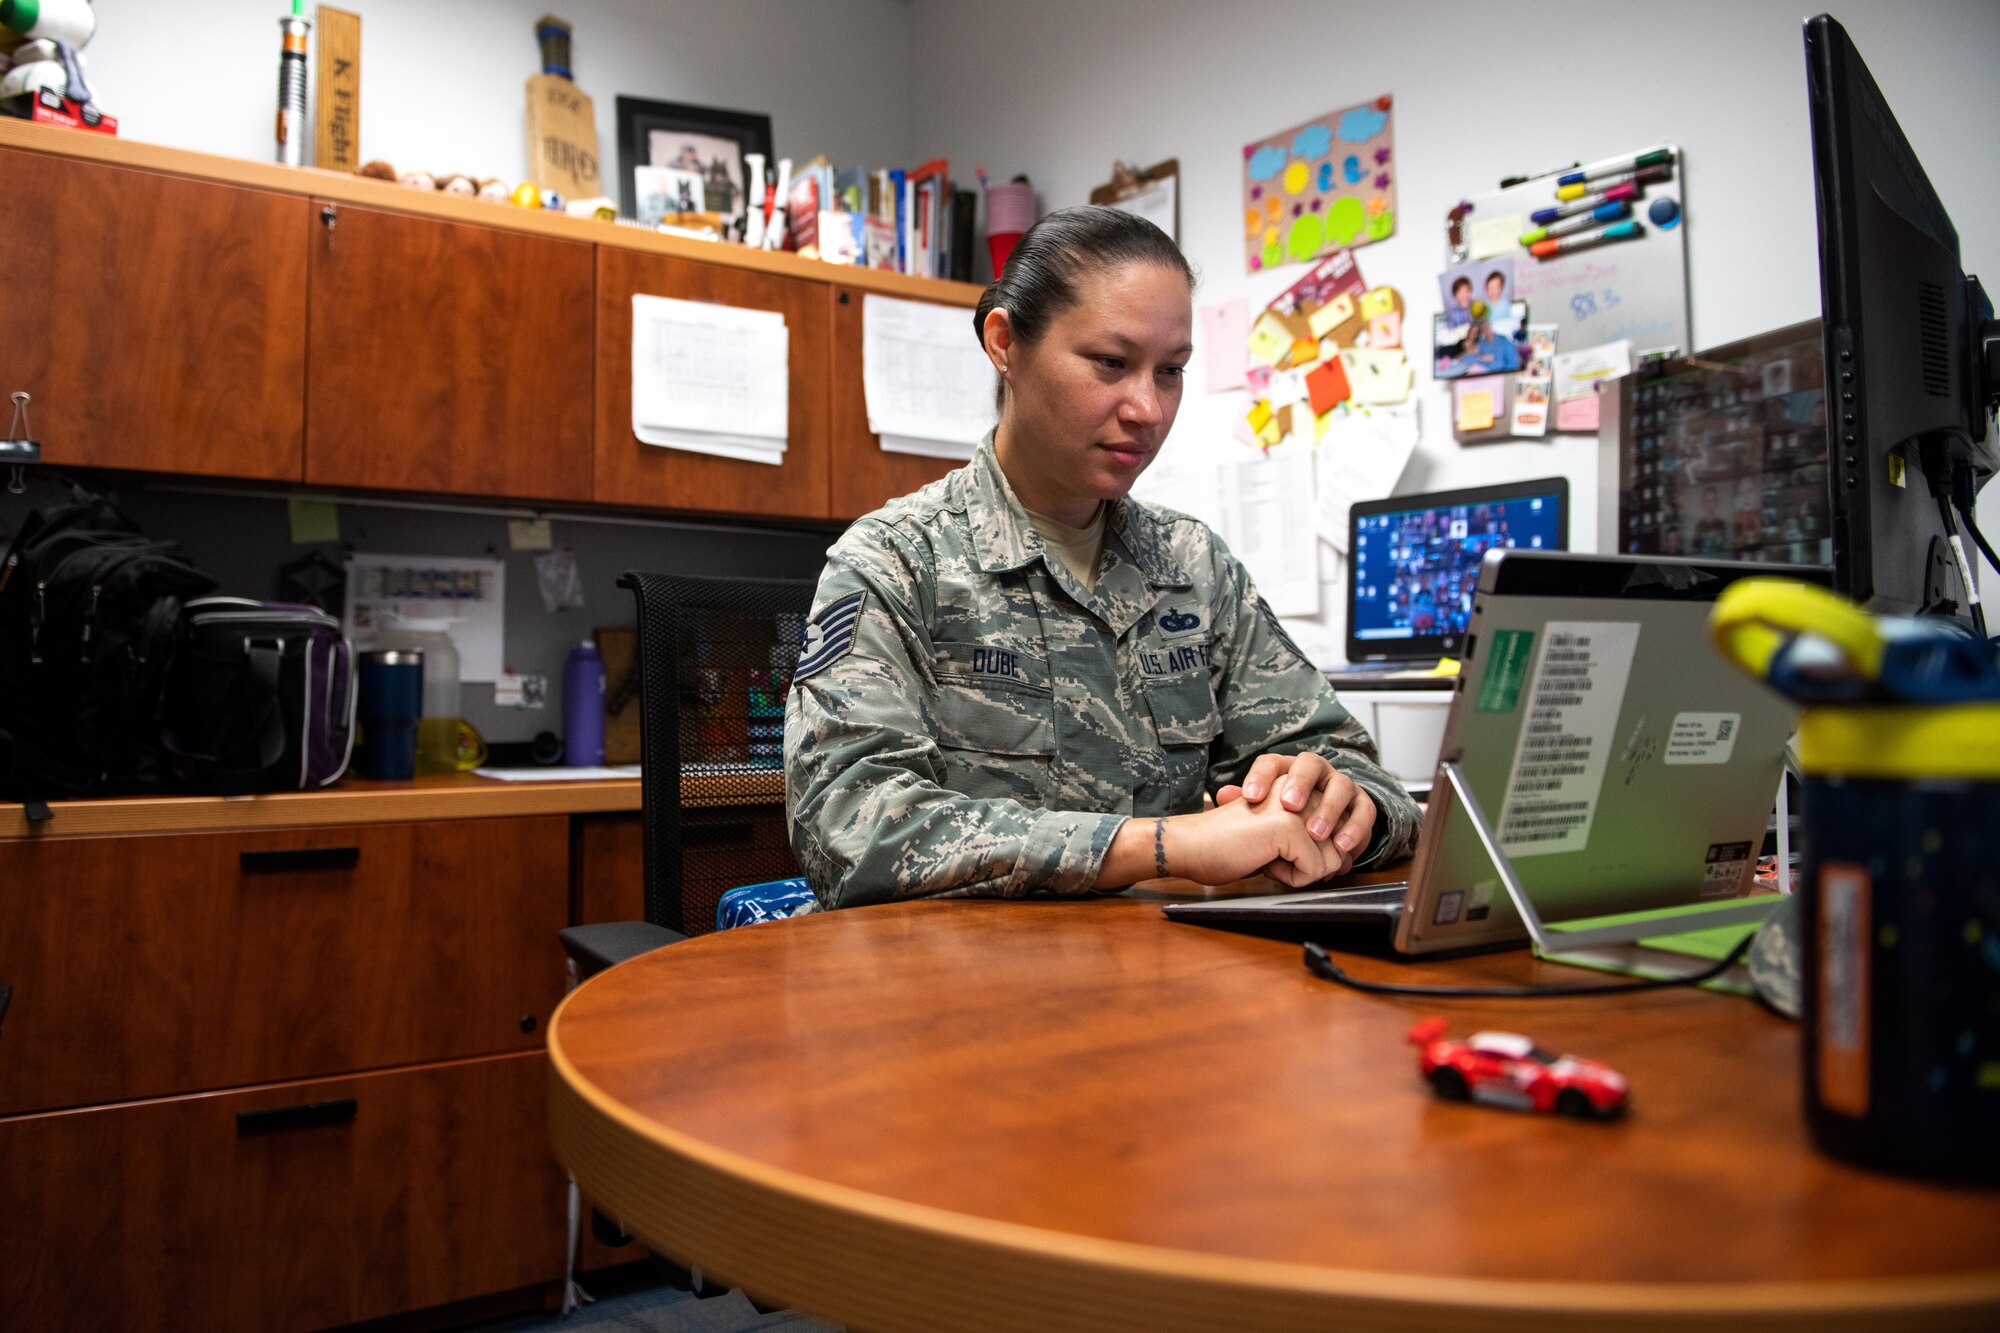 U.S. Air Force Tech. Sgt. Kristen Dube, Robert D. Gaylor Non-Commissioned Officer Academy (NCOA) senior instructor, evaluates Tech. Sgt. Kristen Peck, student instructor, during a virtual class June 23, 2020, at Joint Base San Antonio-Lackland, Texas.